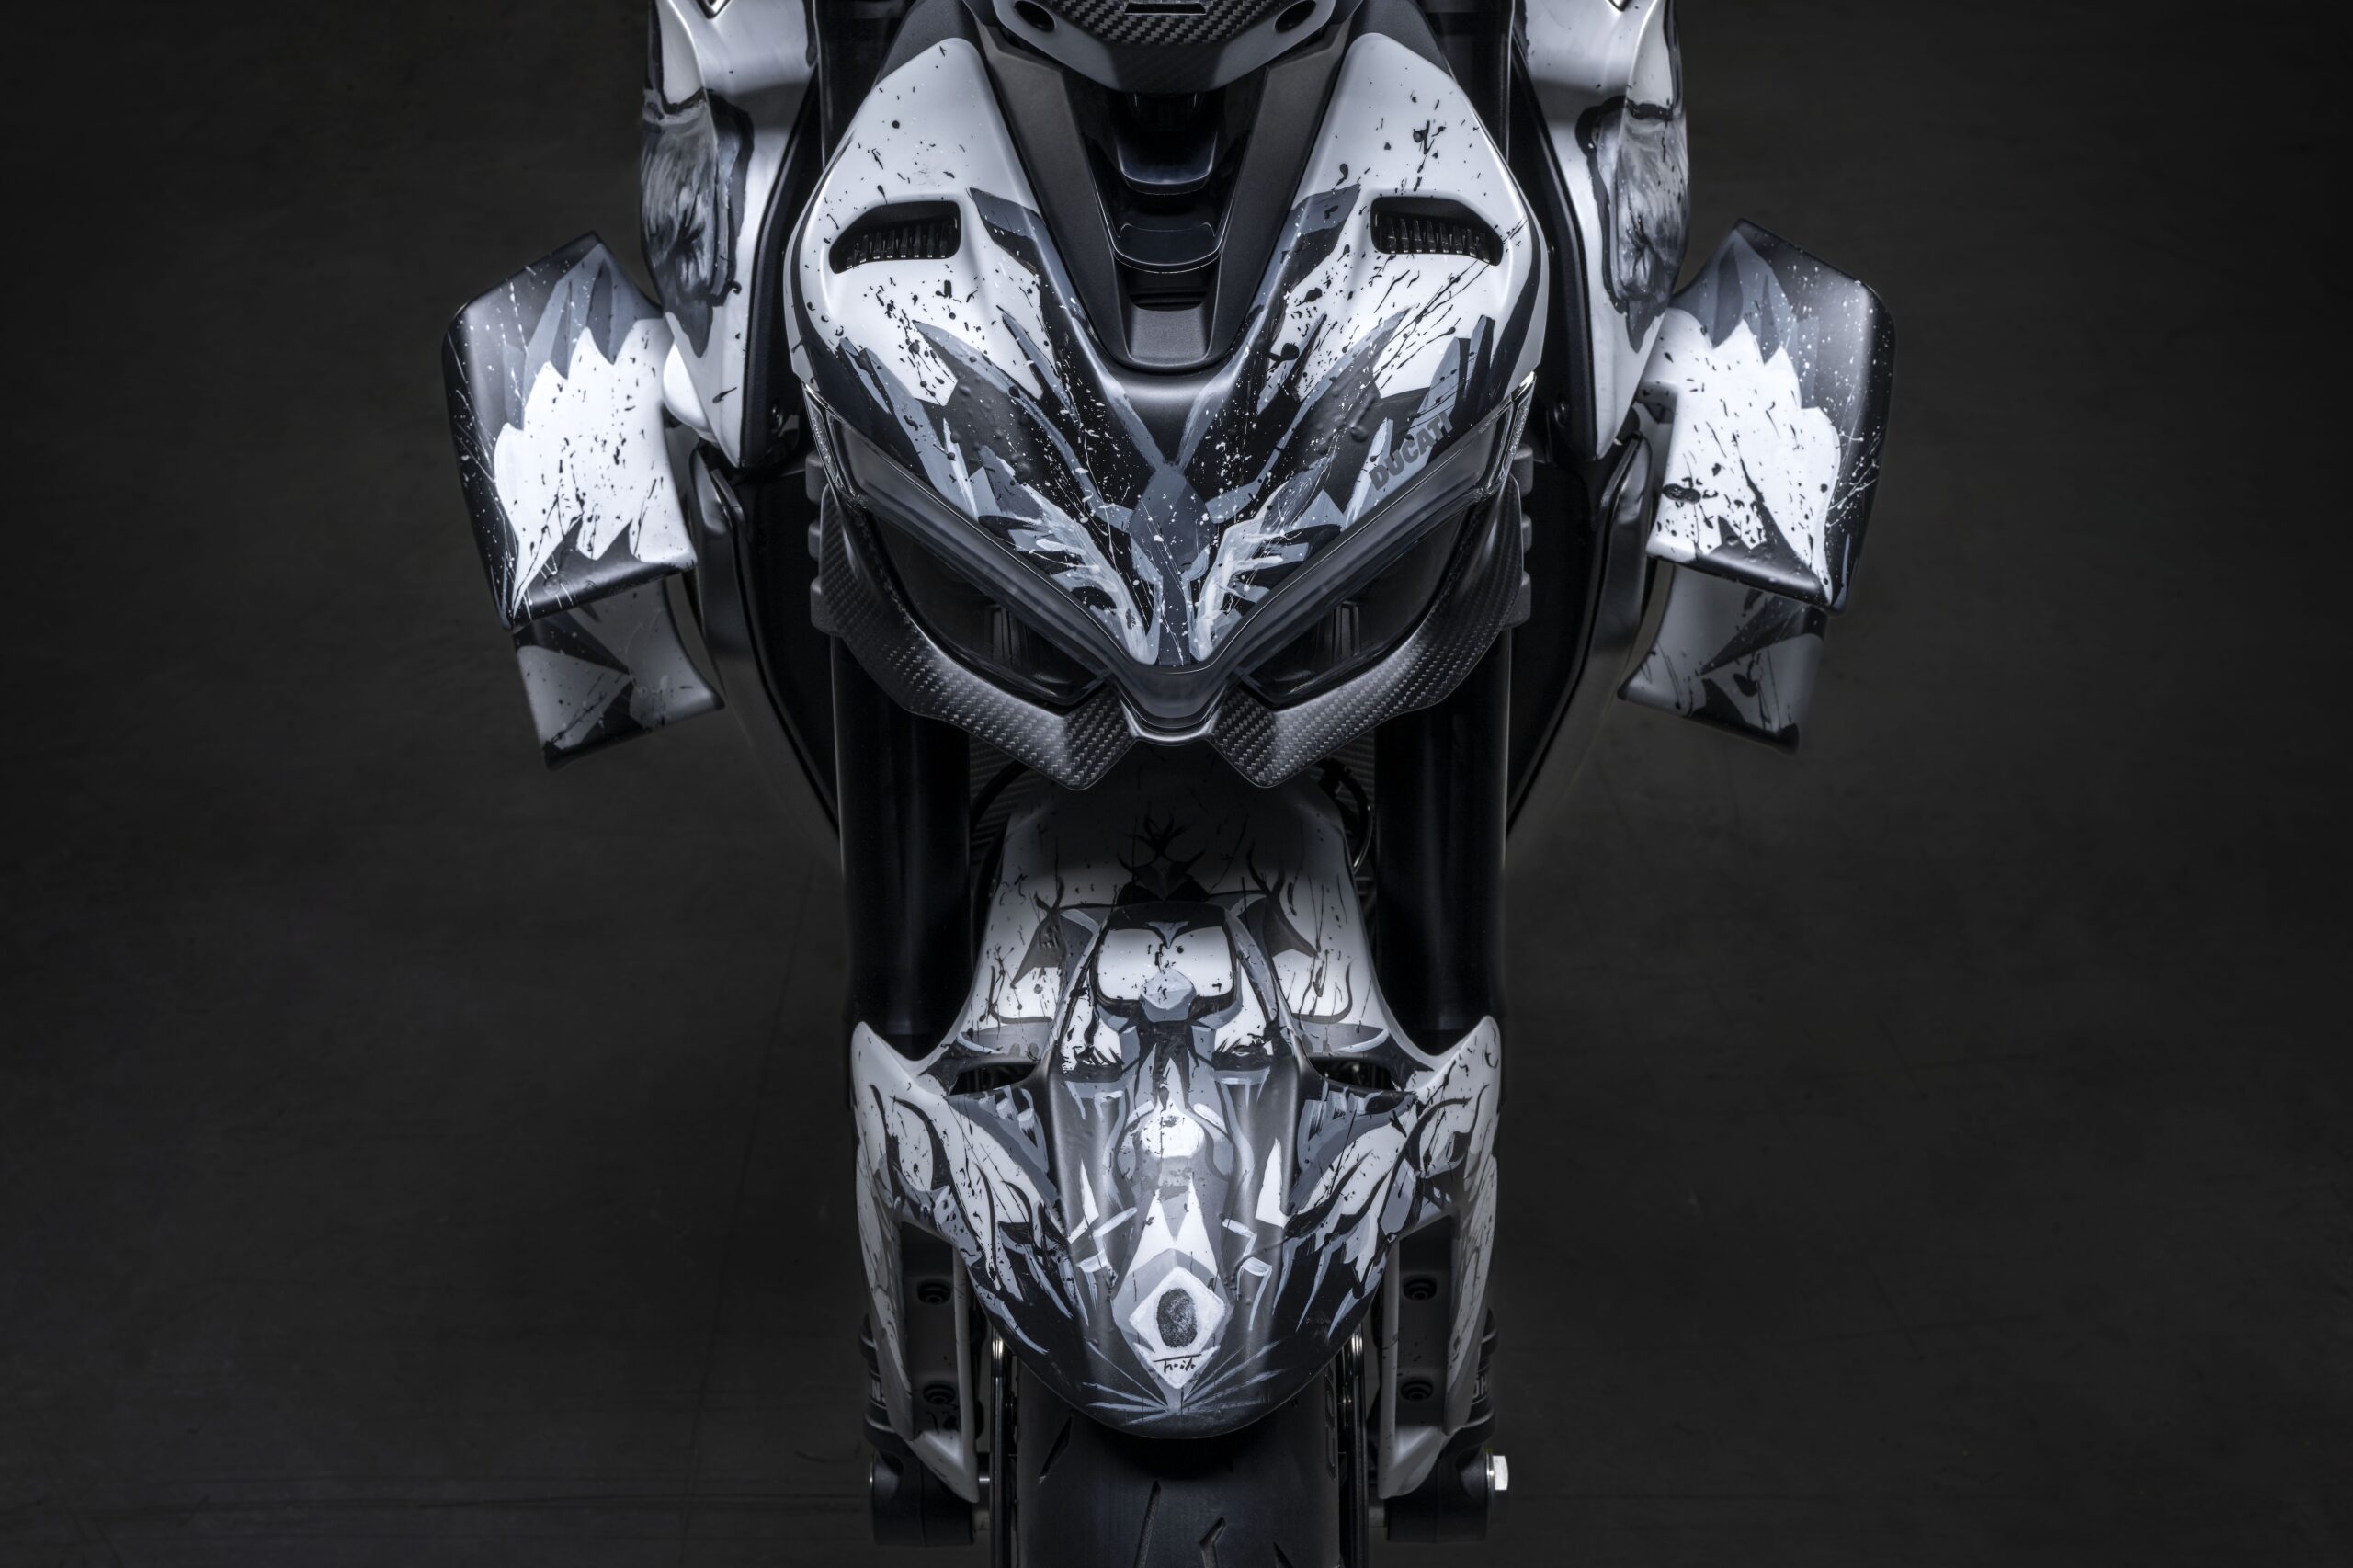 "Centauro", a work of art by Paolo Troilo painted on a Ducati Streetfighter V4 Lamborghini Speciale Clienti